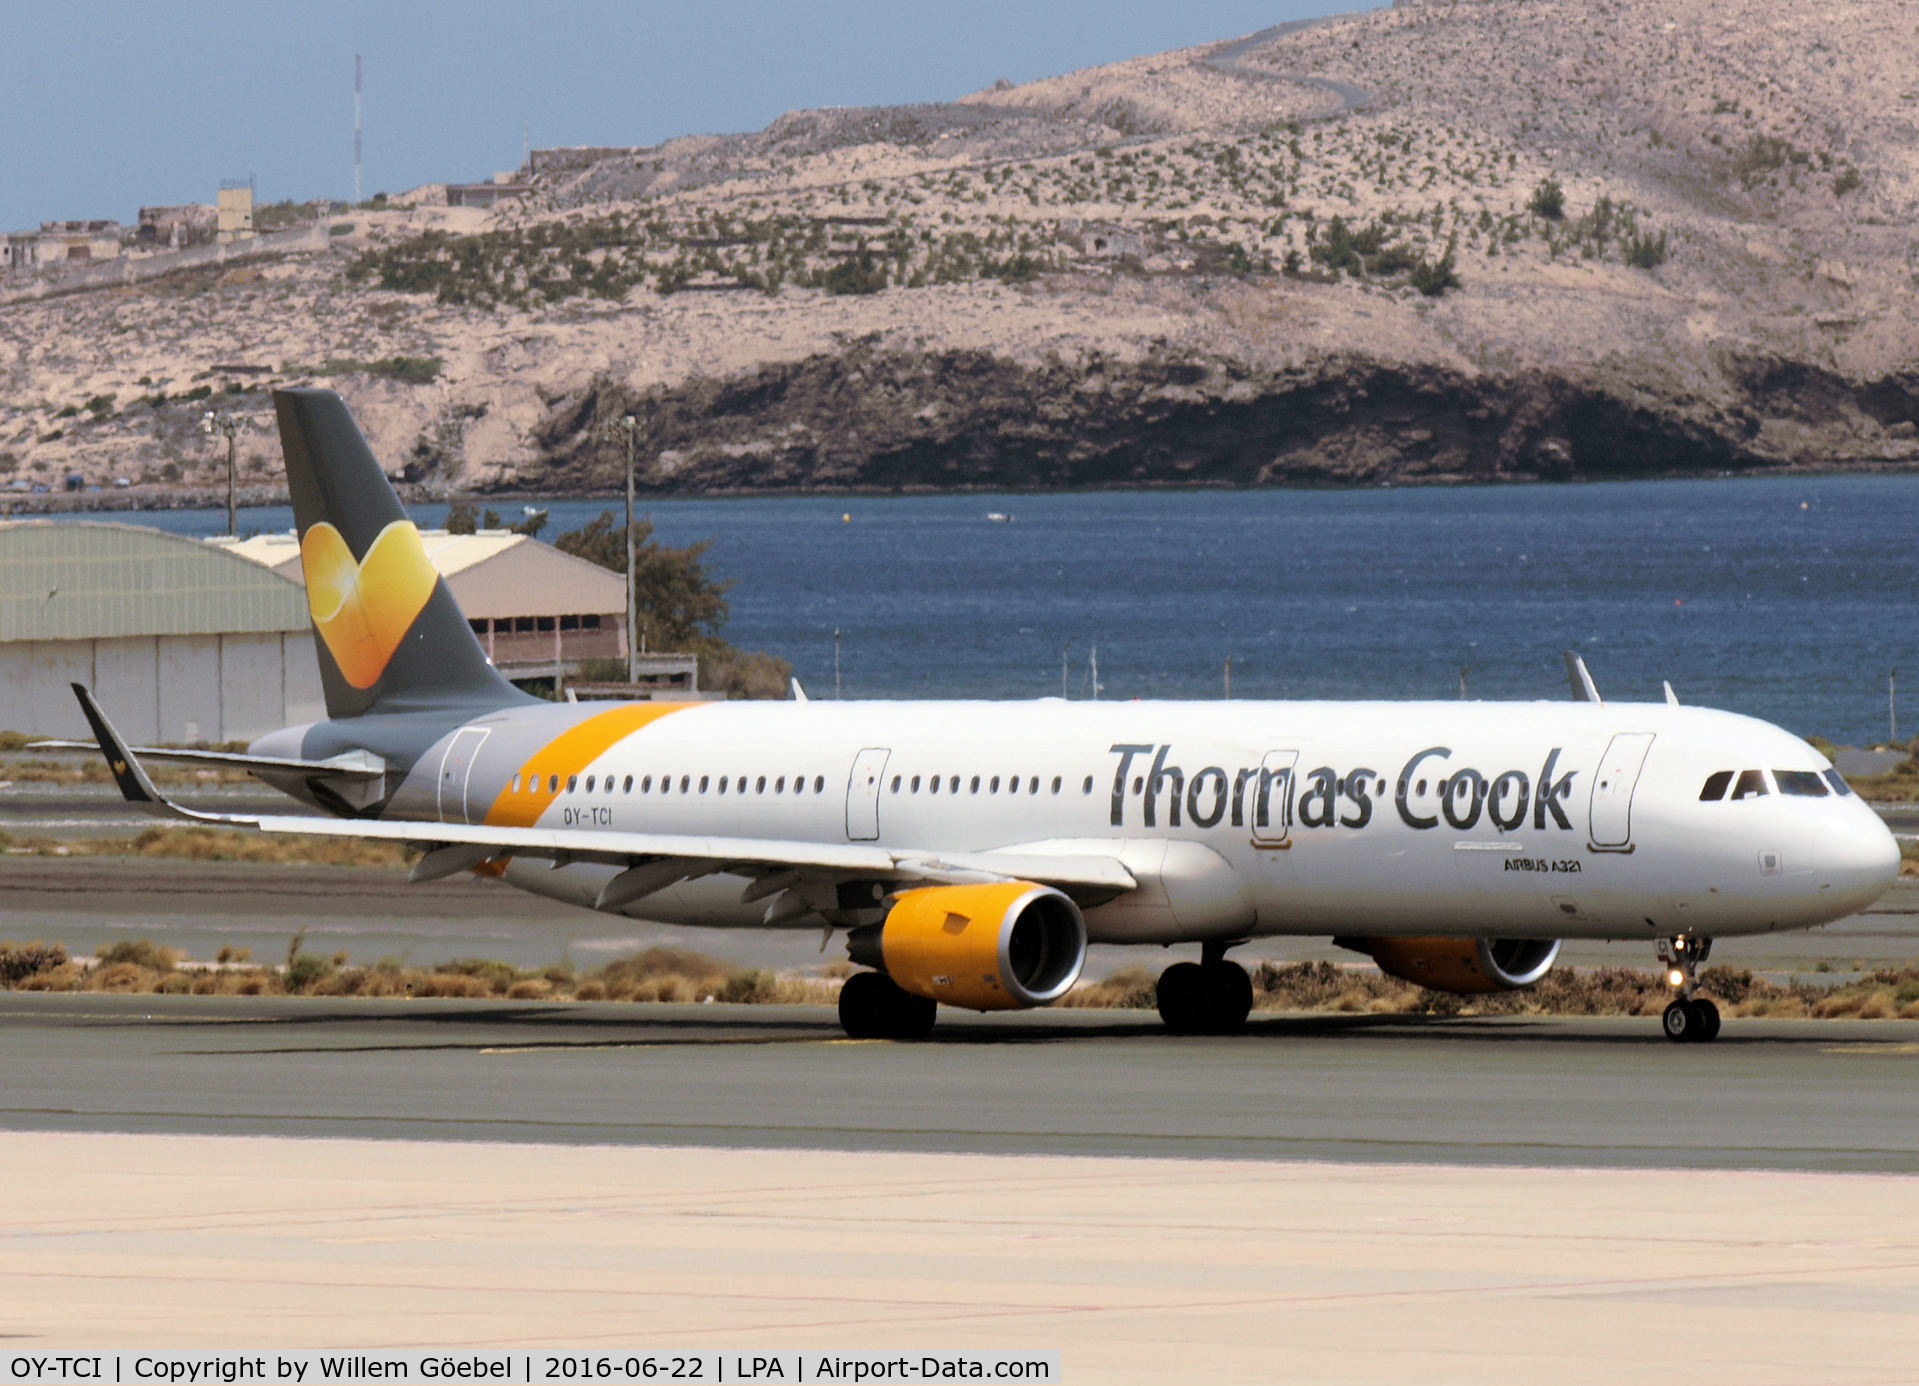 OY-TCI, 2015 Airbus A321-211 C/N 6468, Taxi to the runway of Las Palmas Airport